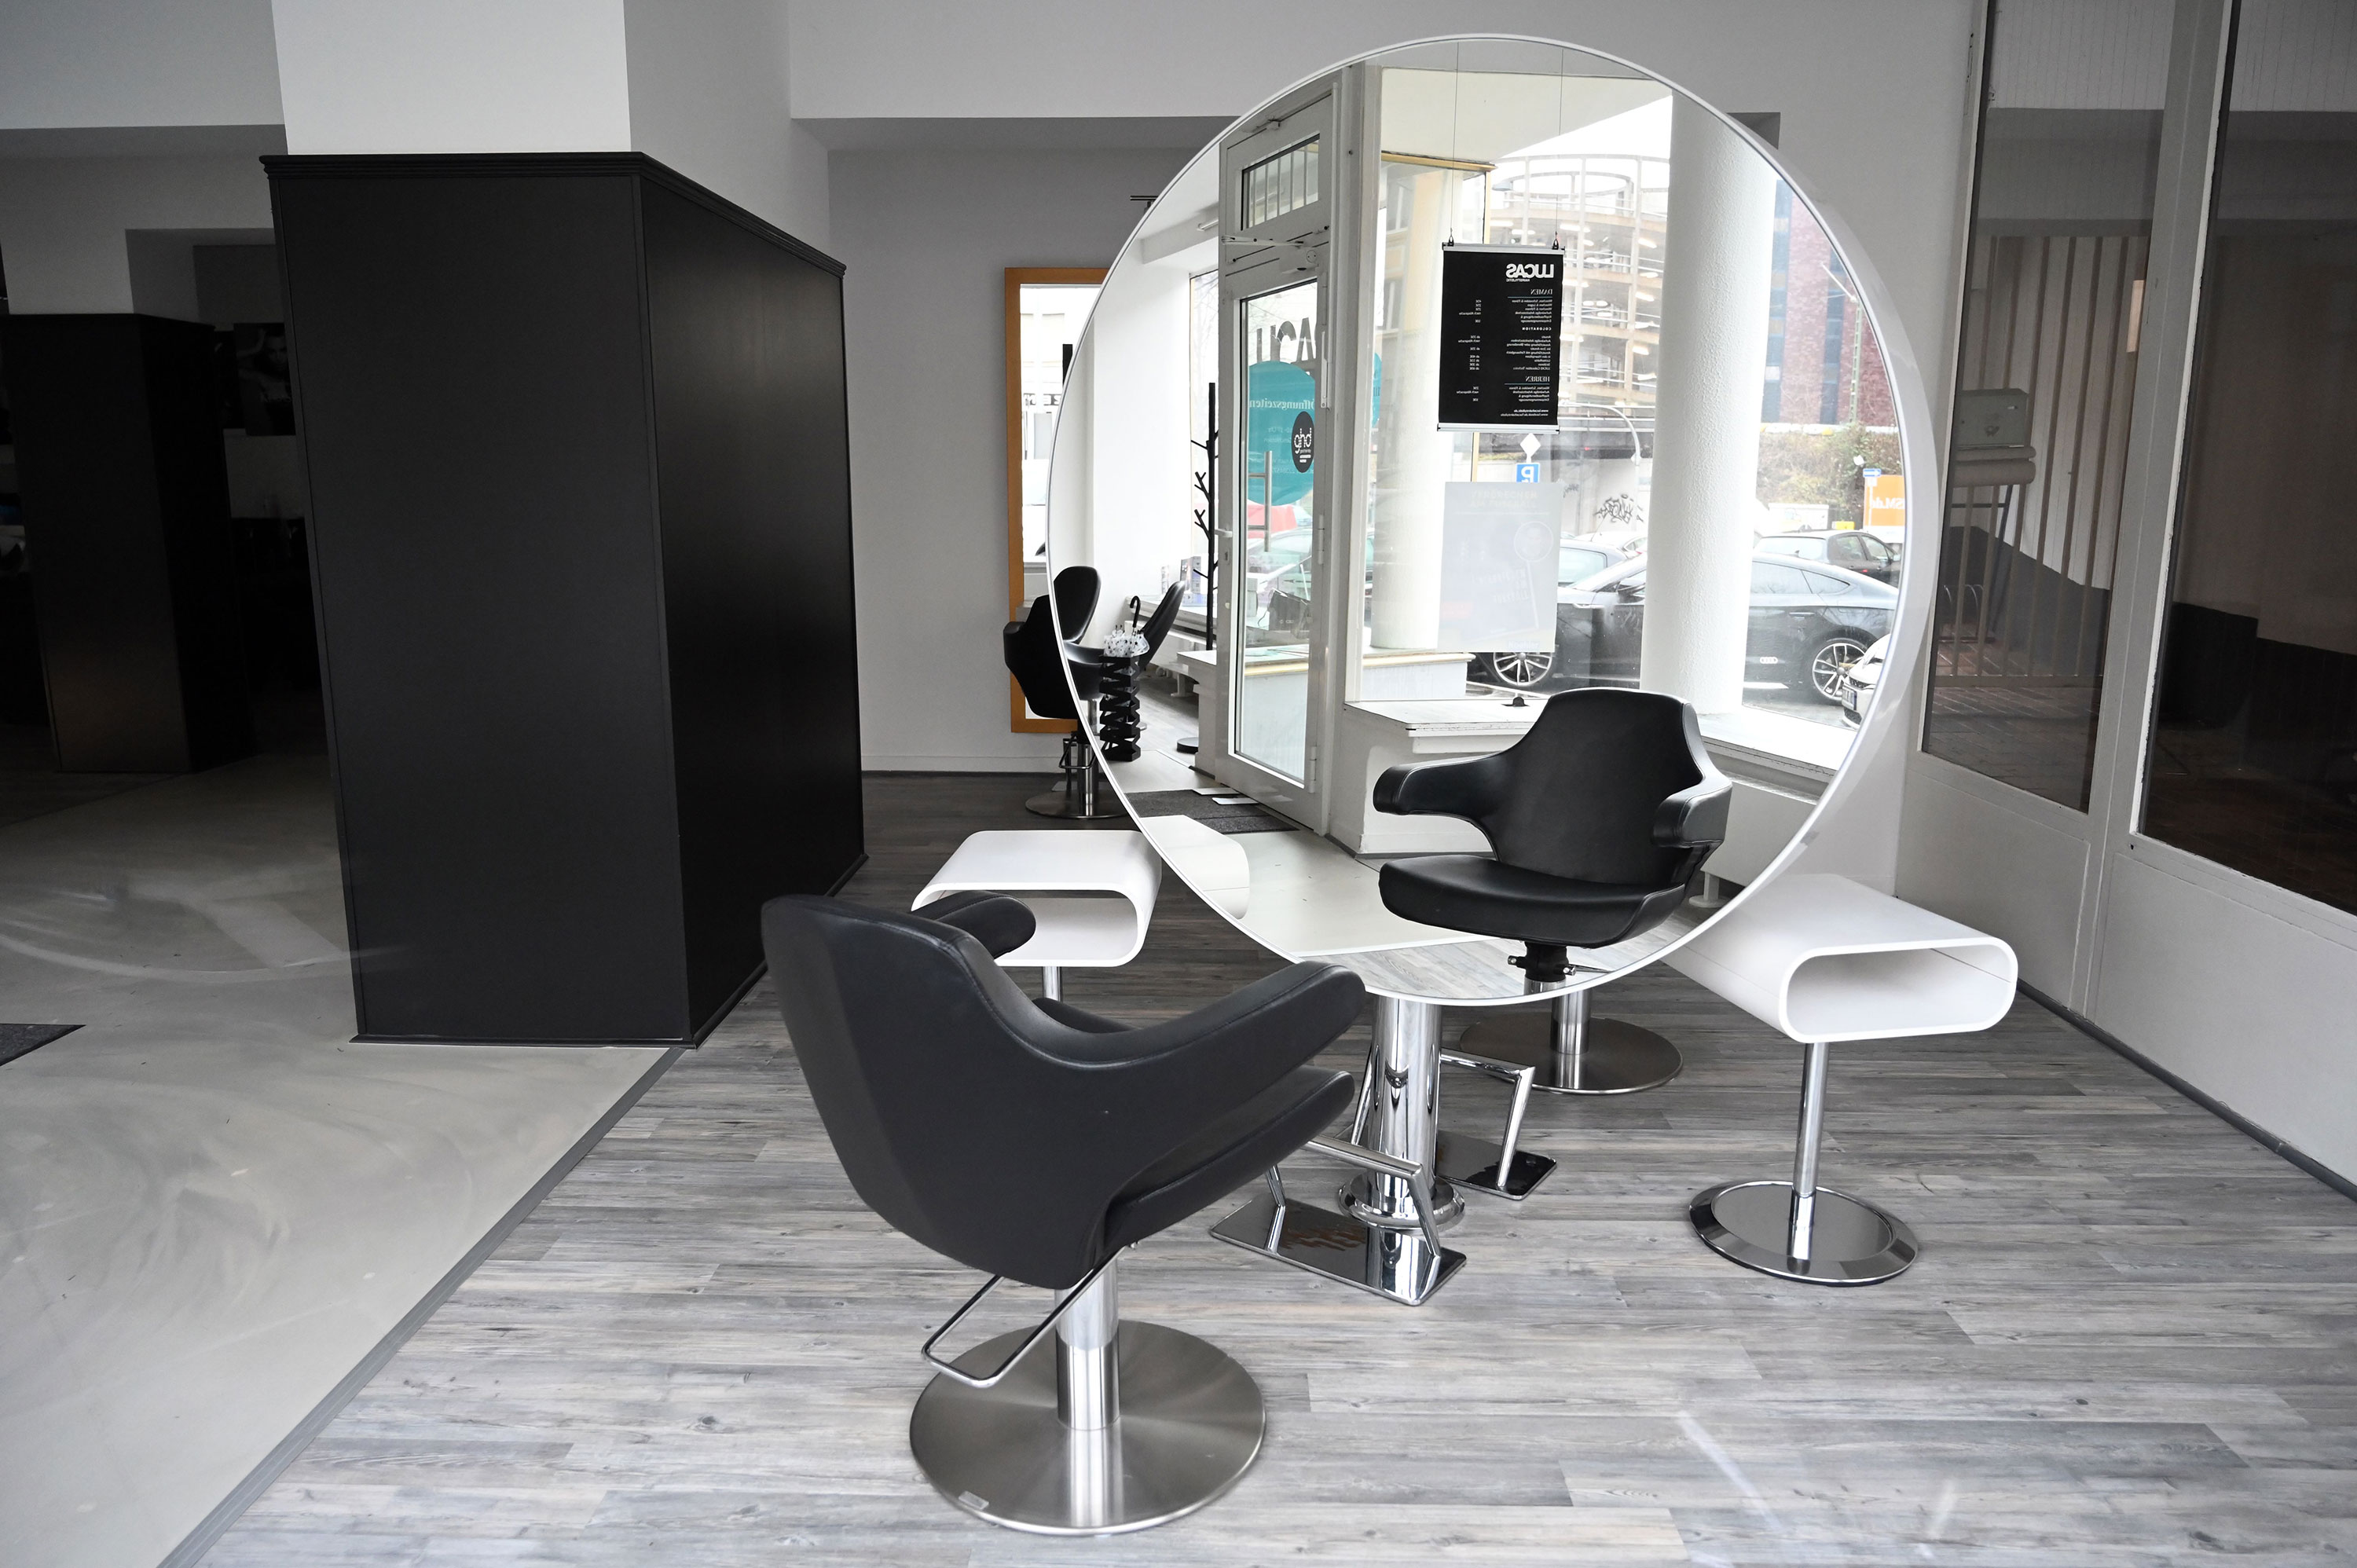 A closed and empty salon is seen in Dortmund, Germany, on January 19.